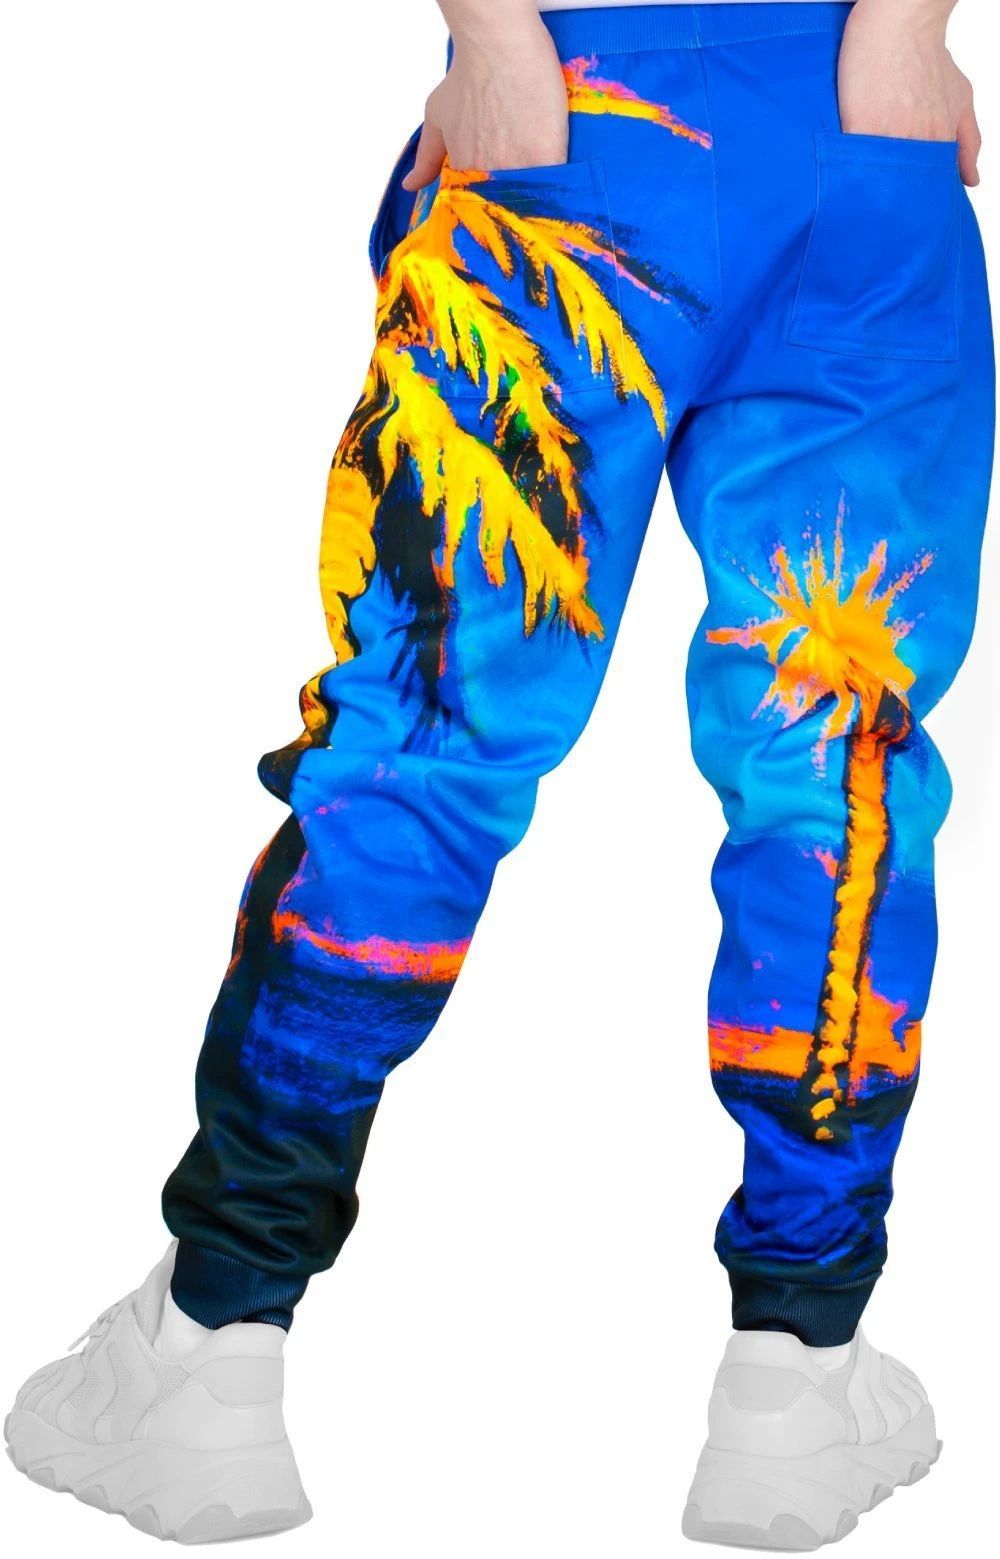 Neon Pants for Party Designed Blacklight Glow Hawaii Palms pm1